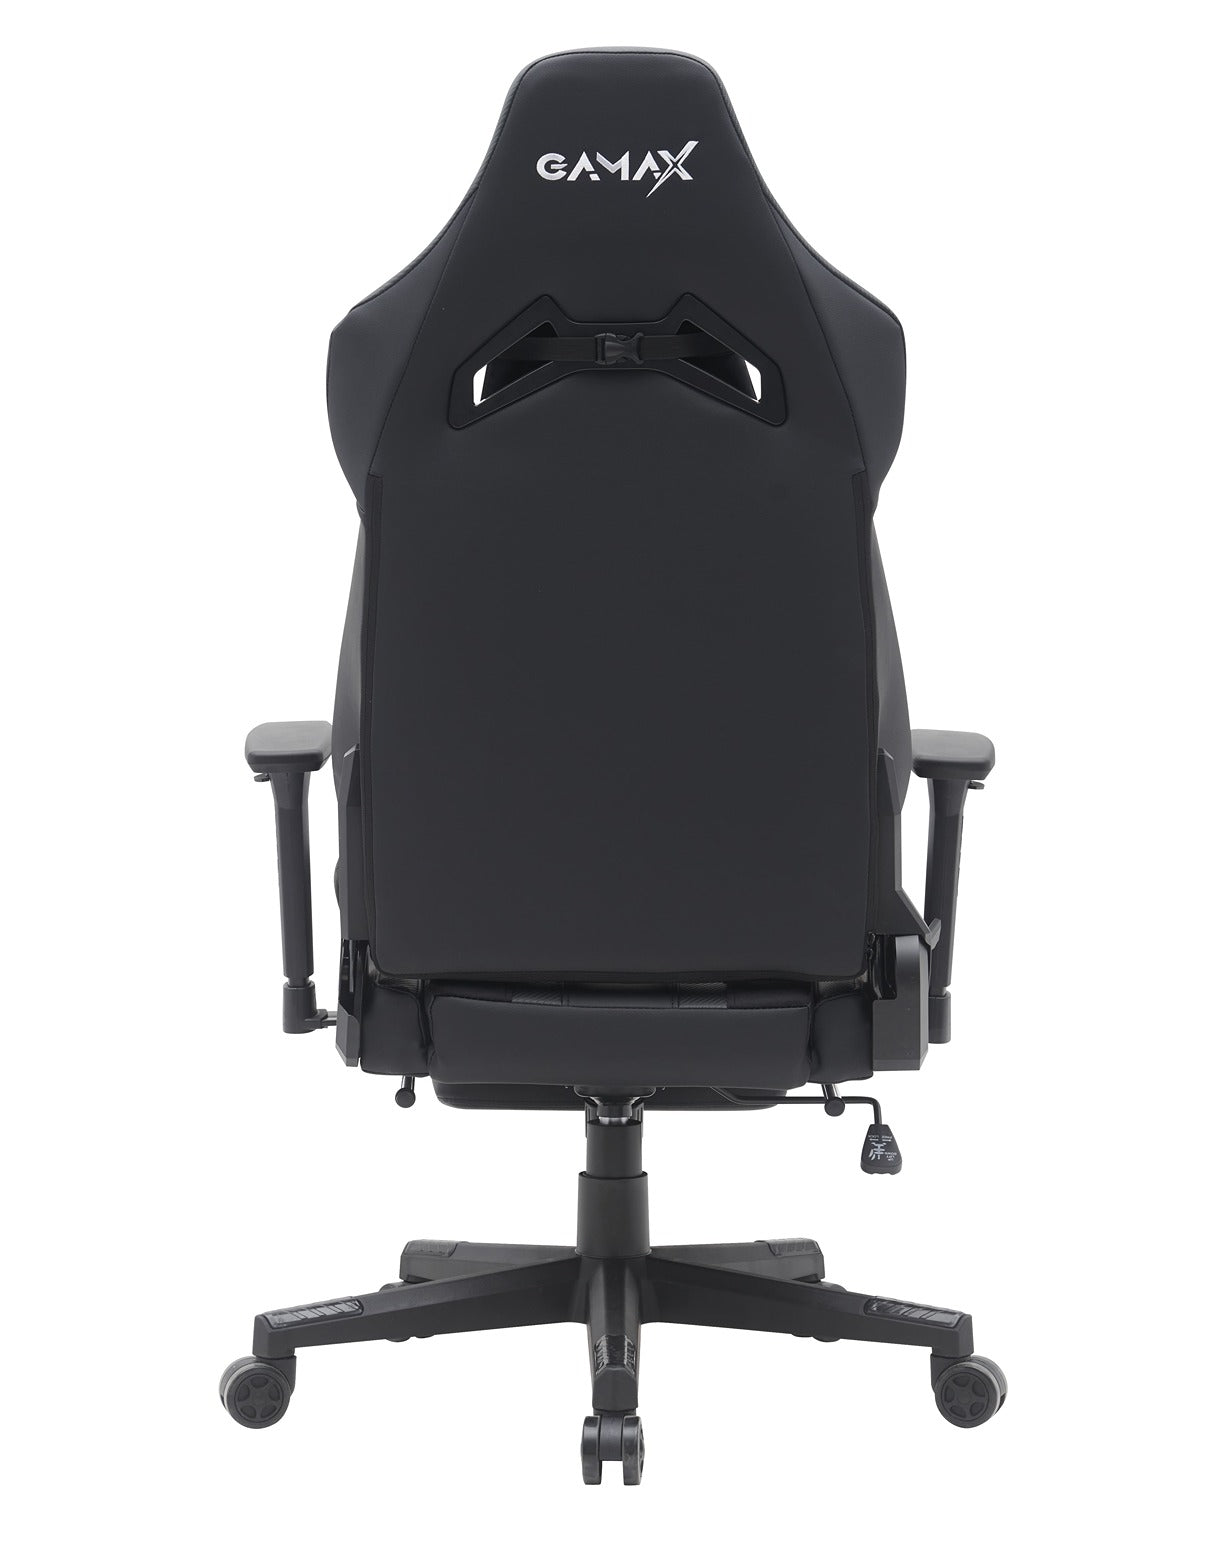 Gamax Gaming Chair model BS-7012 with Foot Rest - Black